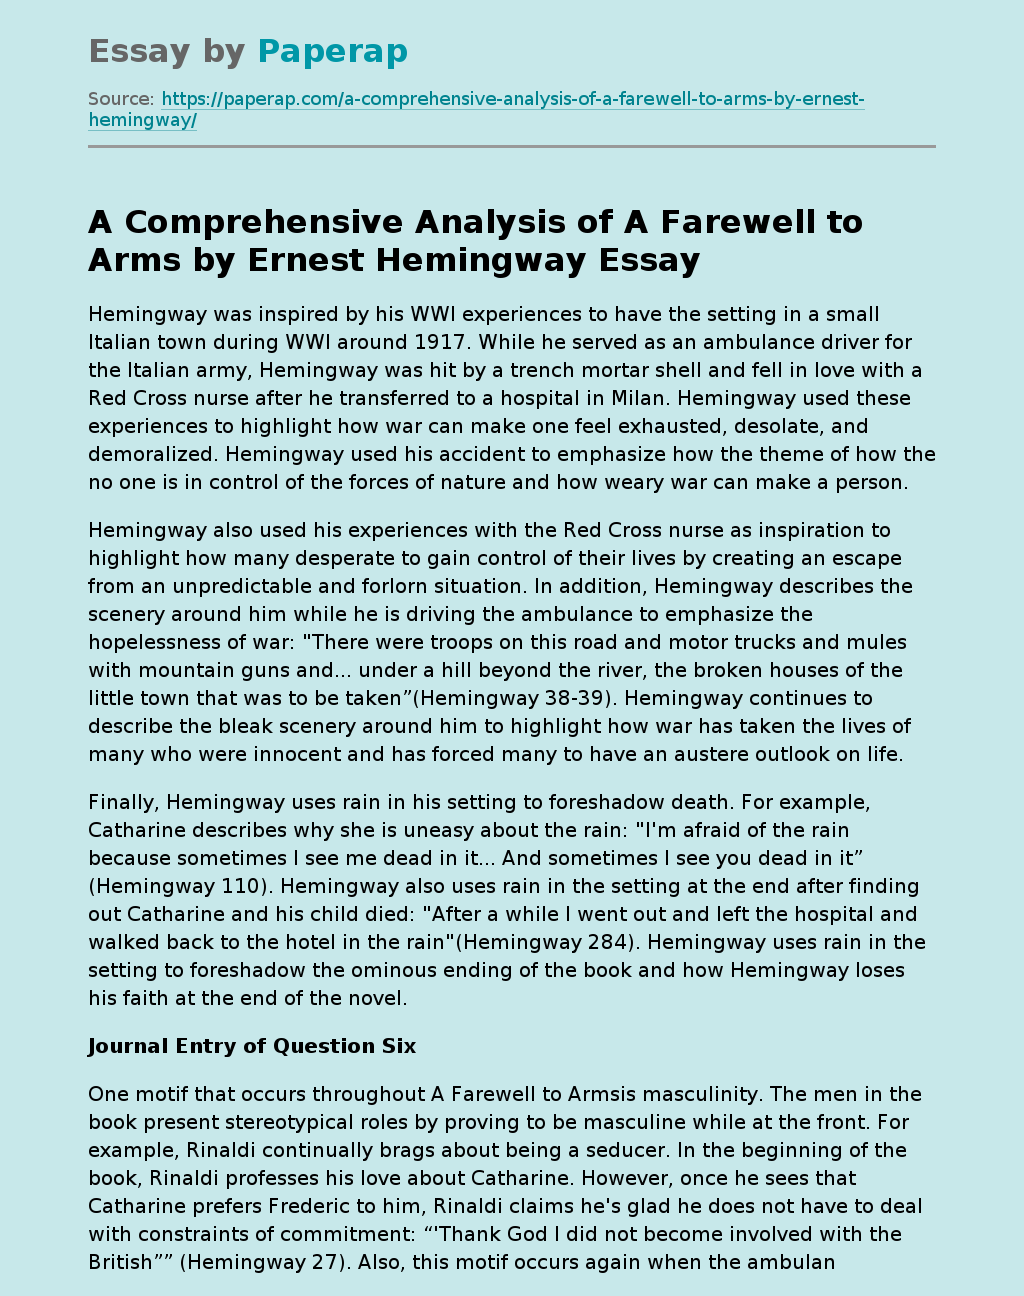 A Comprehensive Analysis of A Farewell to Arms by Ernest Hemingway